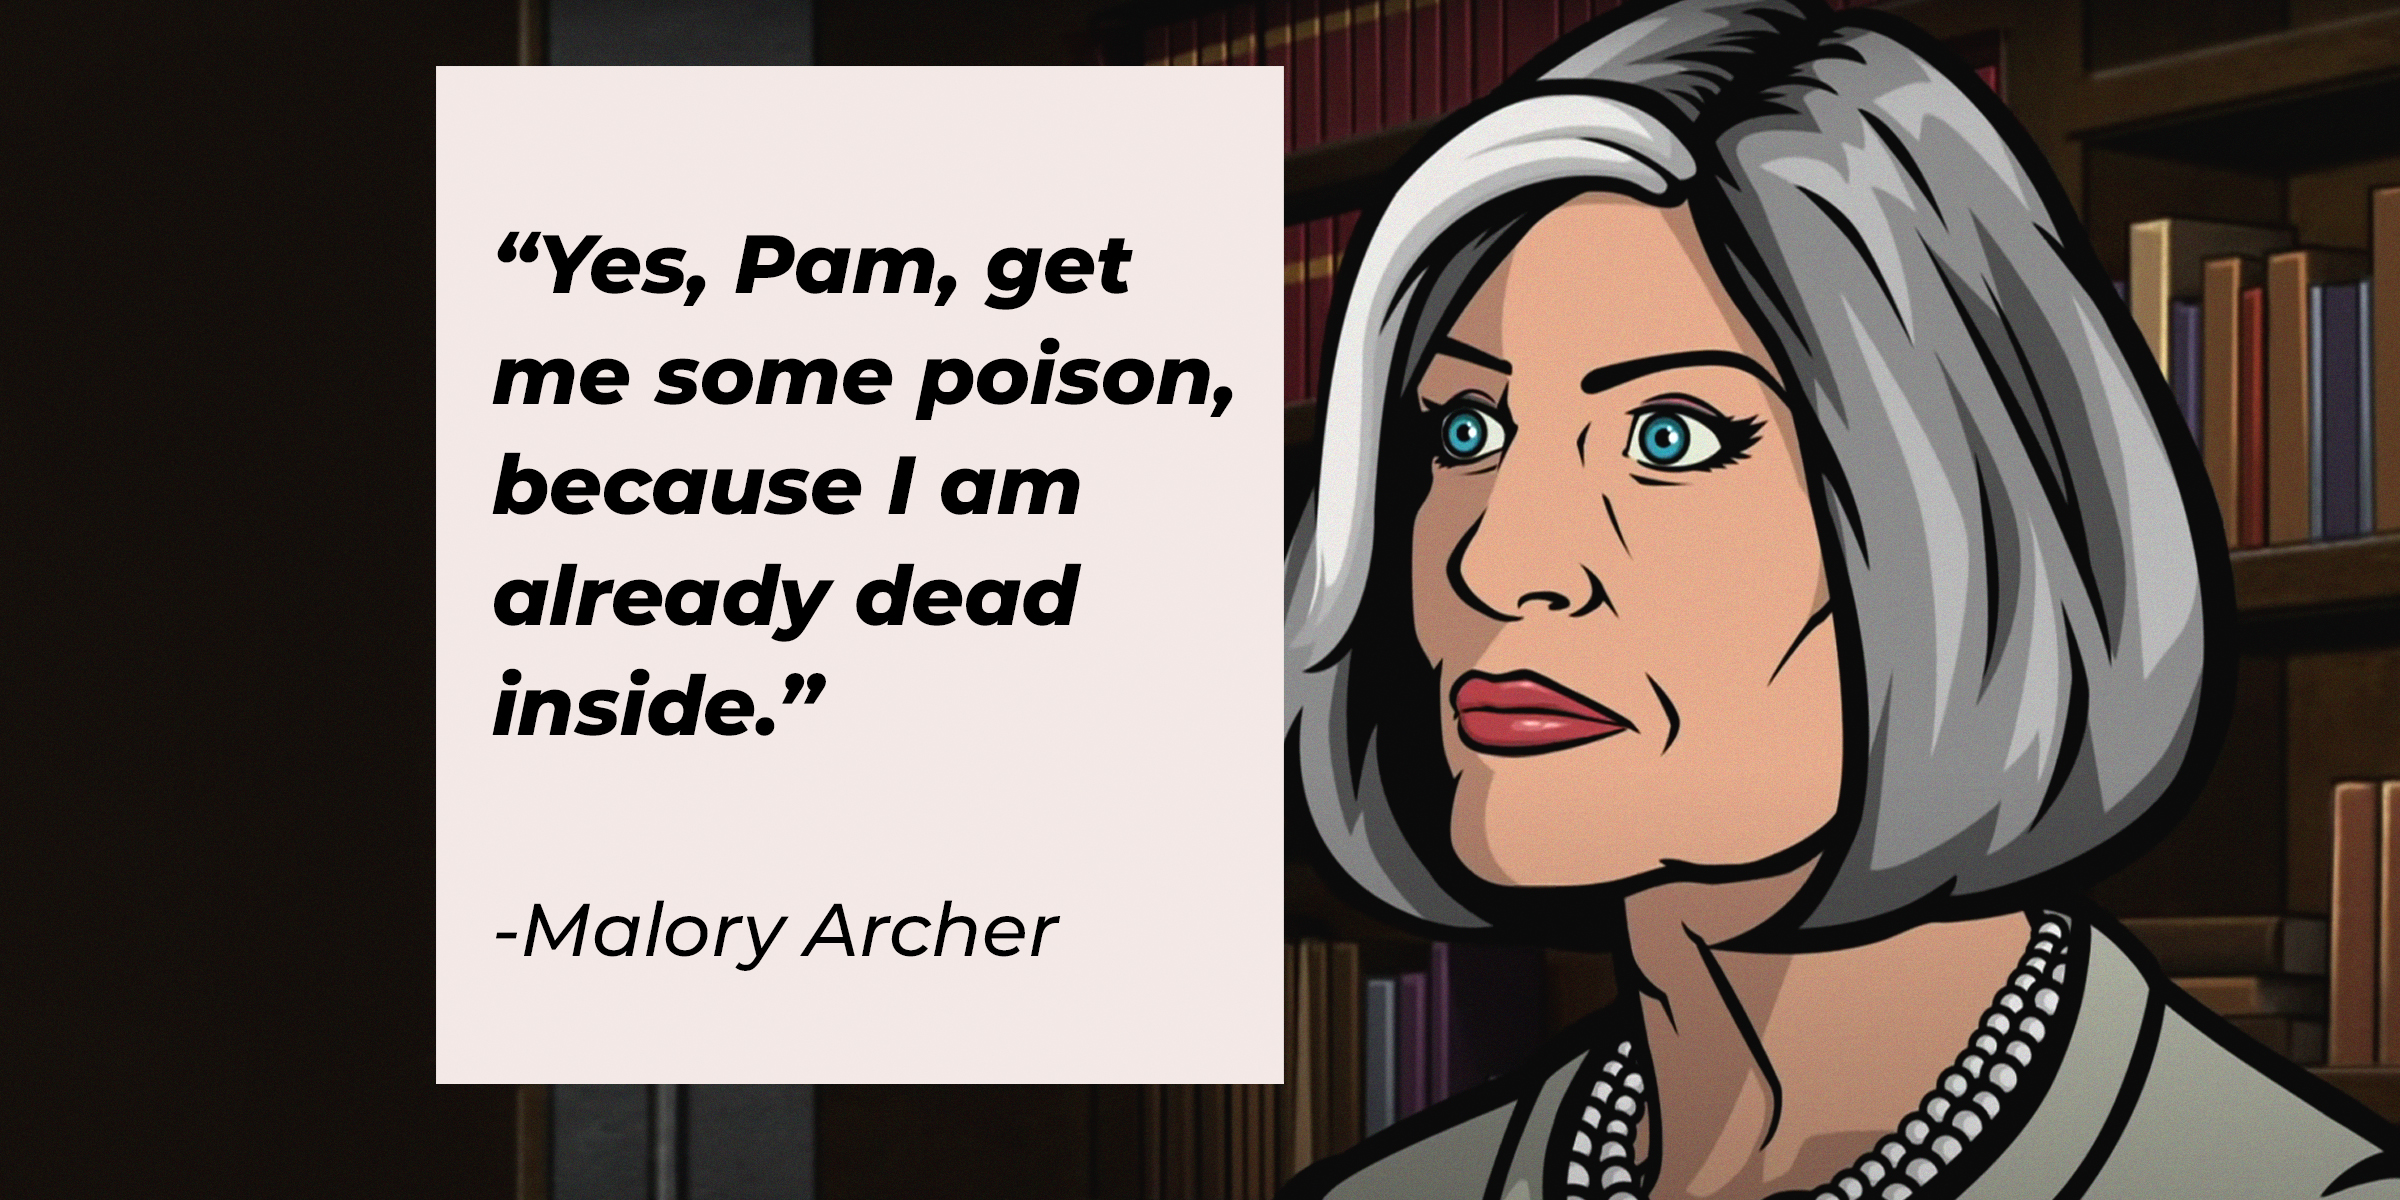 An image of Malory Archer with her quote: “Yes, Pam, get me some poison, because I am already dead inside.” | Source: Youtube.com/Netflixnordic